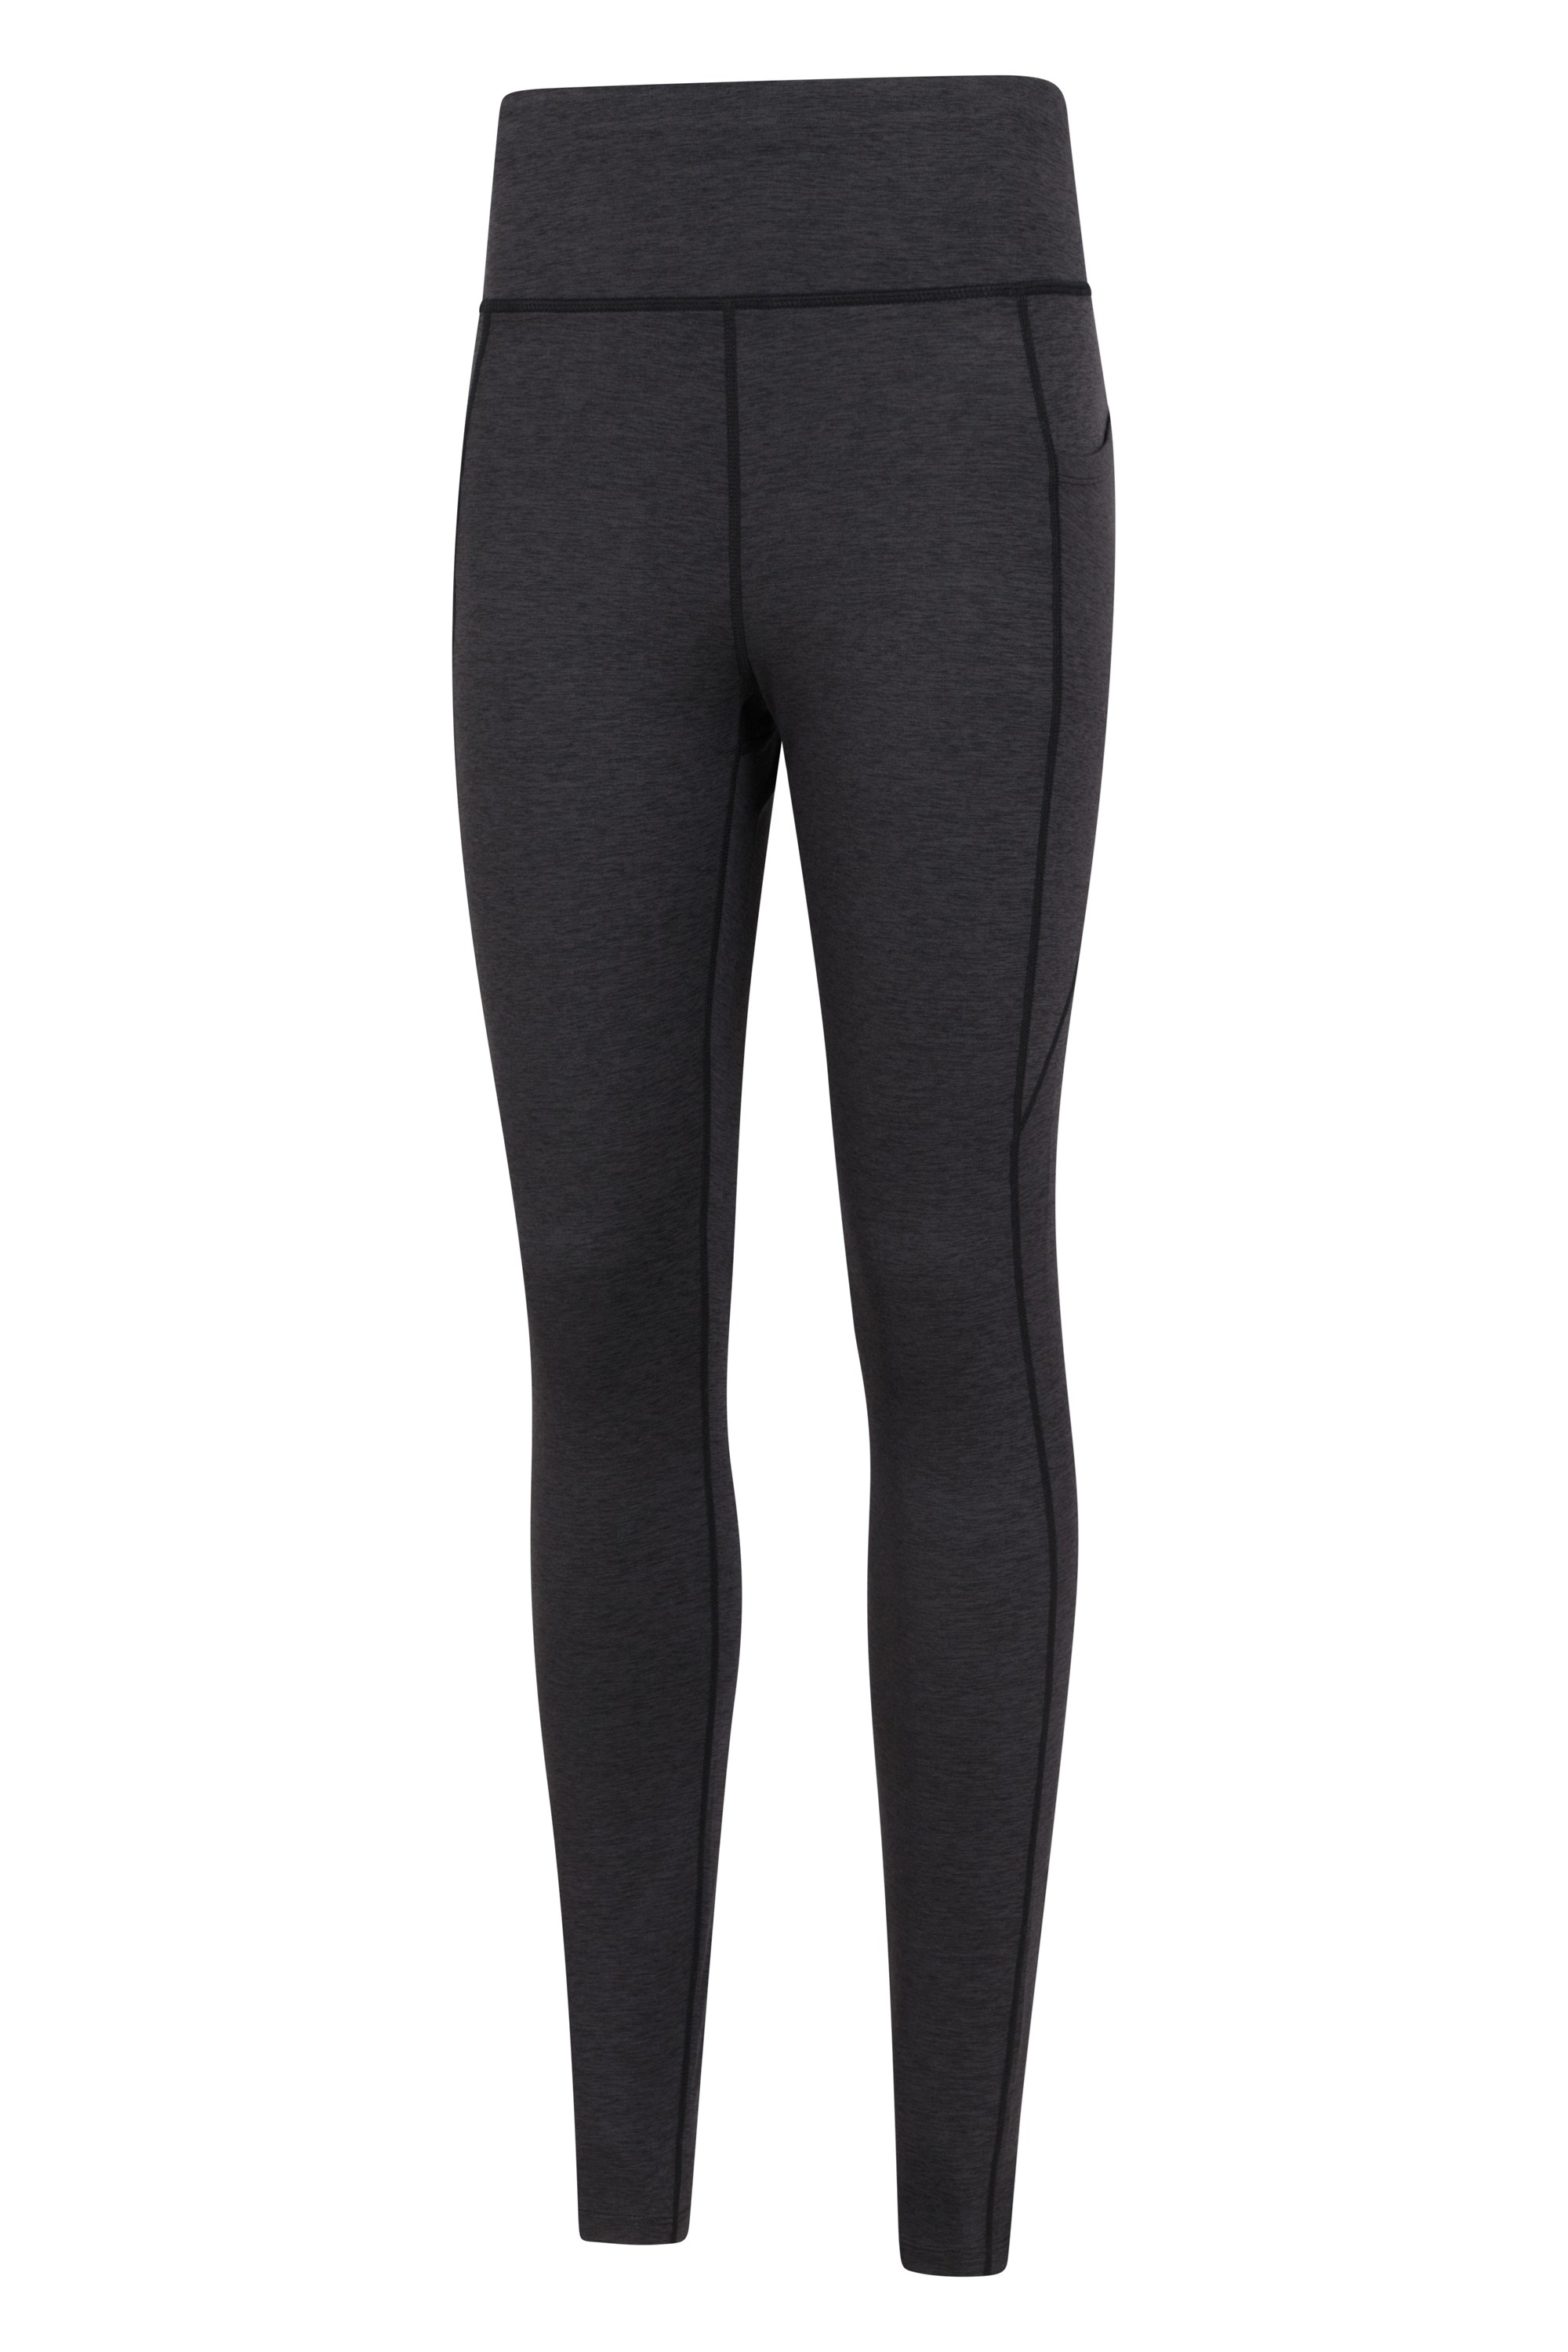 Buy Mountain Warehouse Pink Womens Talus Thermal Leggings from